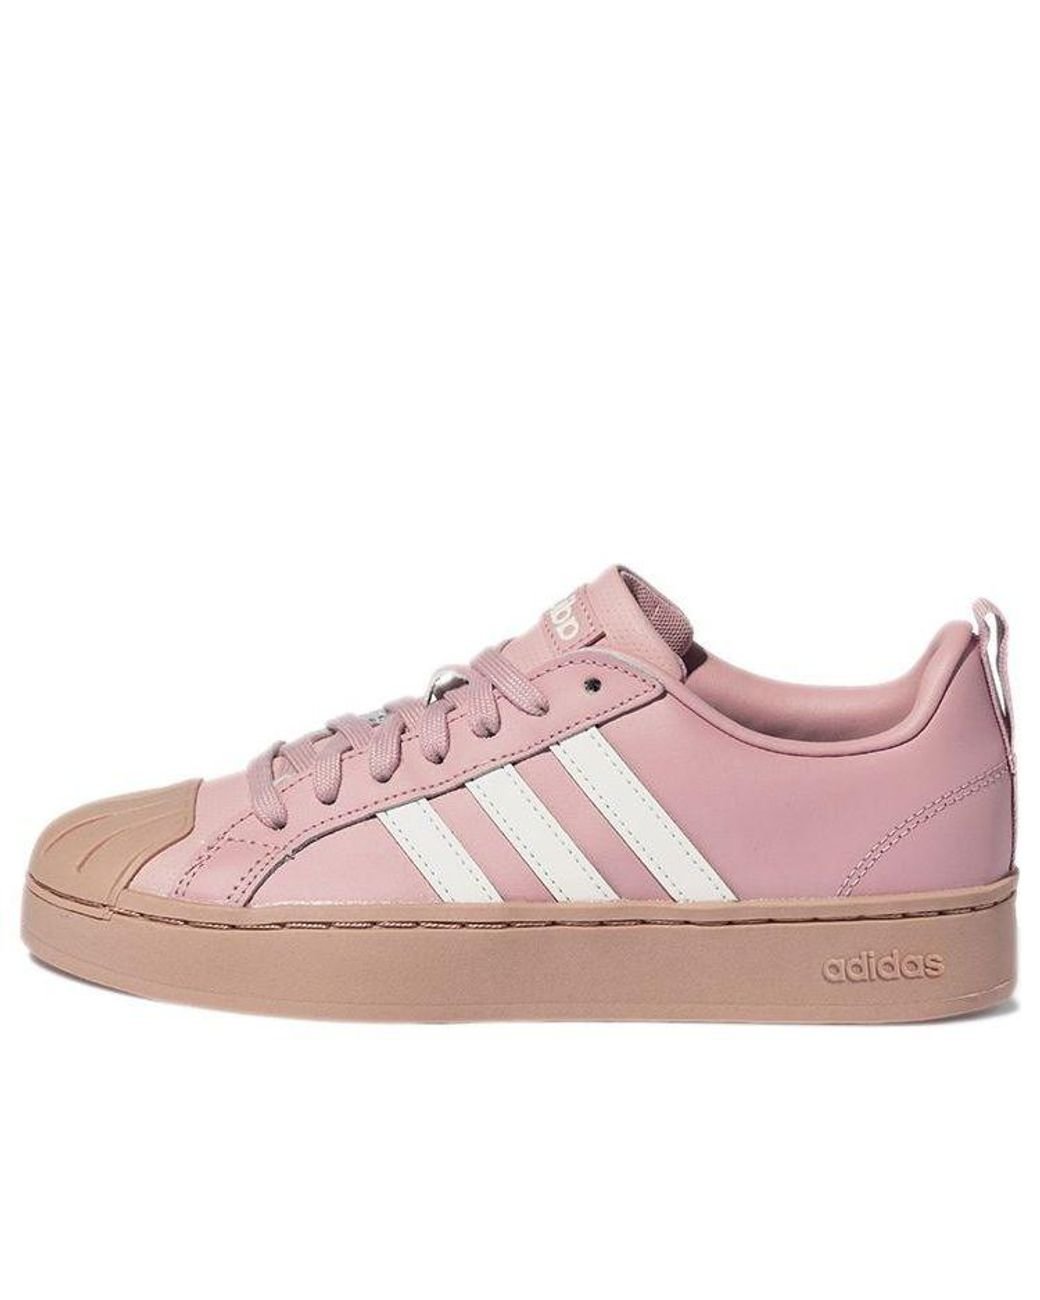 Adidas Neo Female Others Skate Shoes in Pink | Lyst